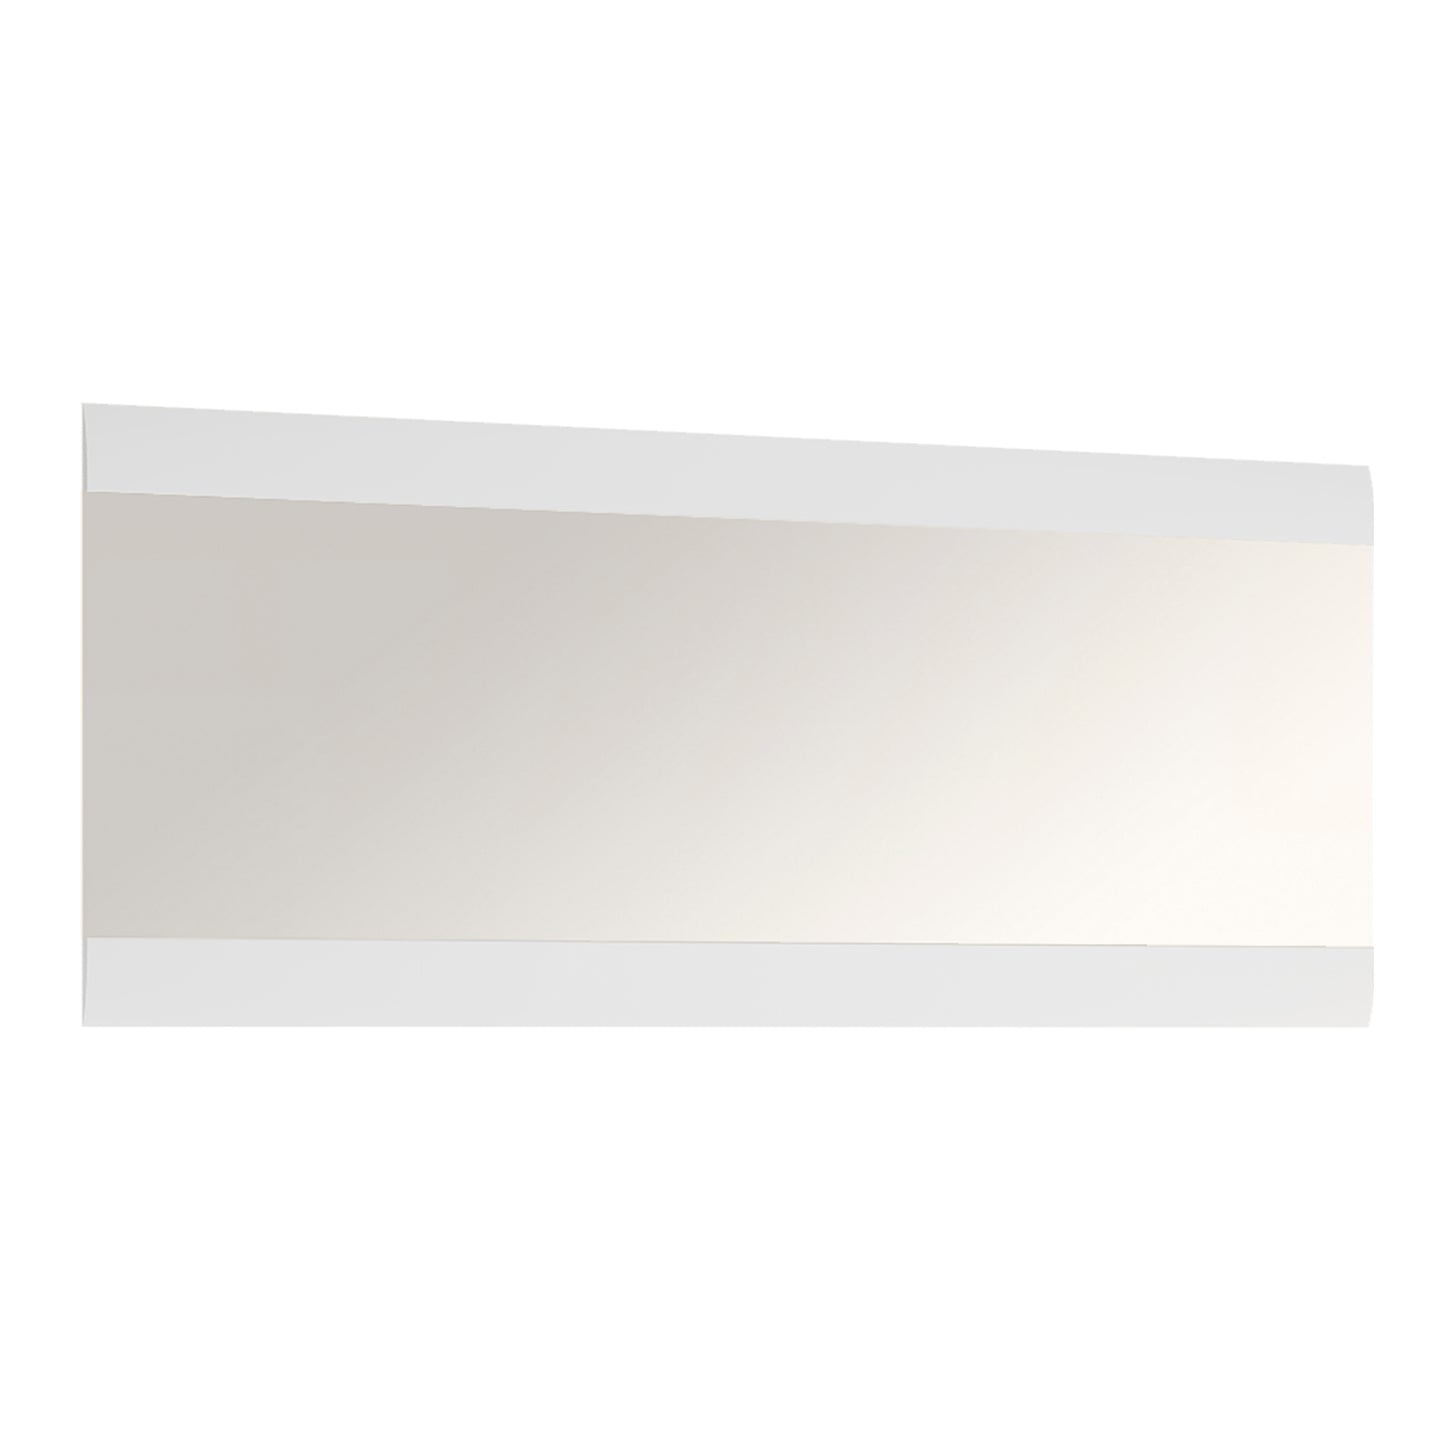 Chelsea  Wall Mirror 164 cm wide in White with Oak Trim